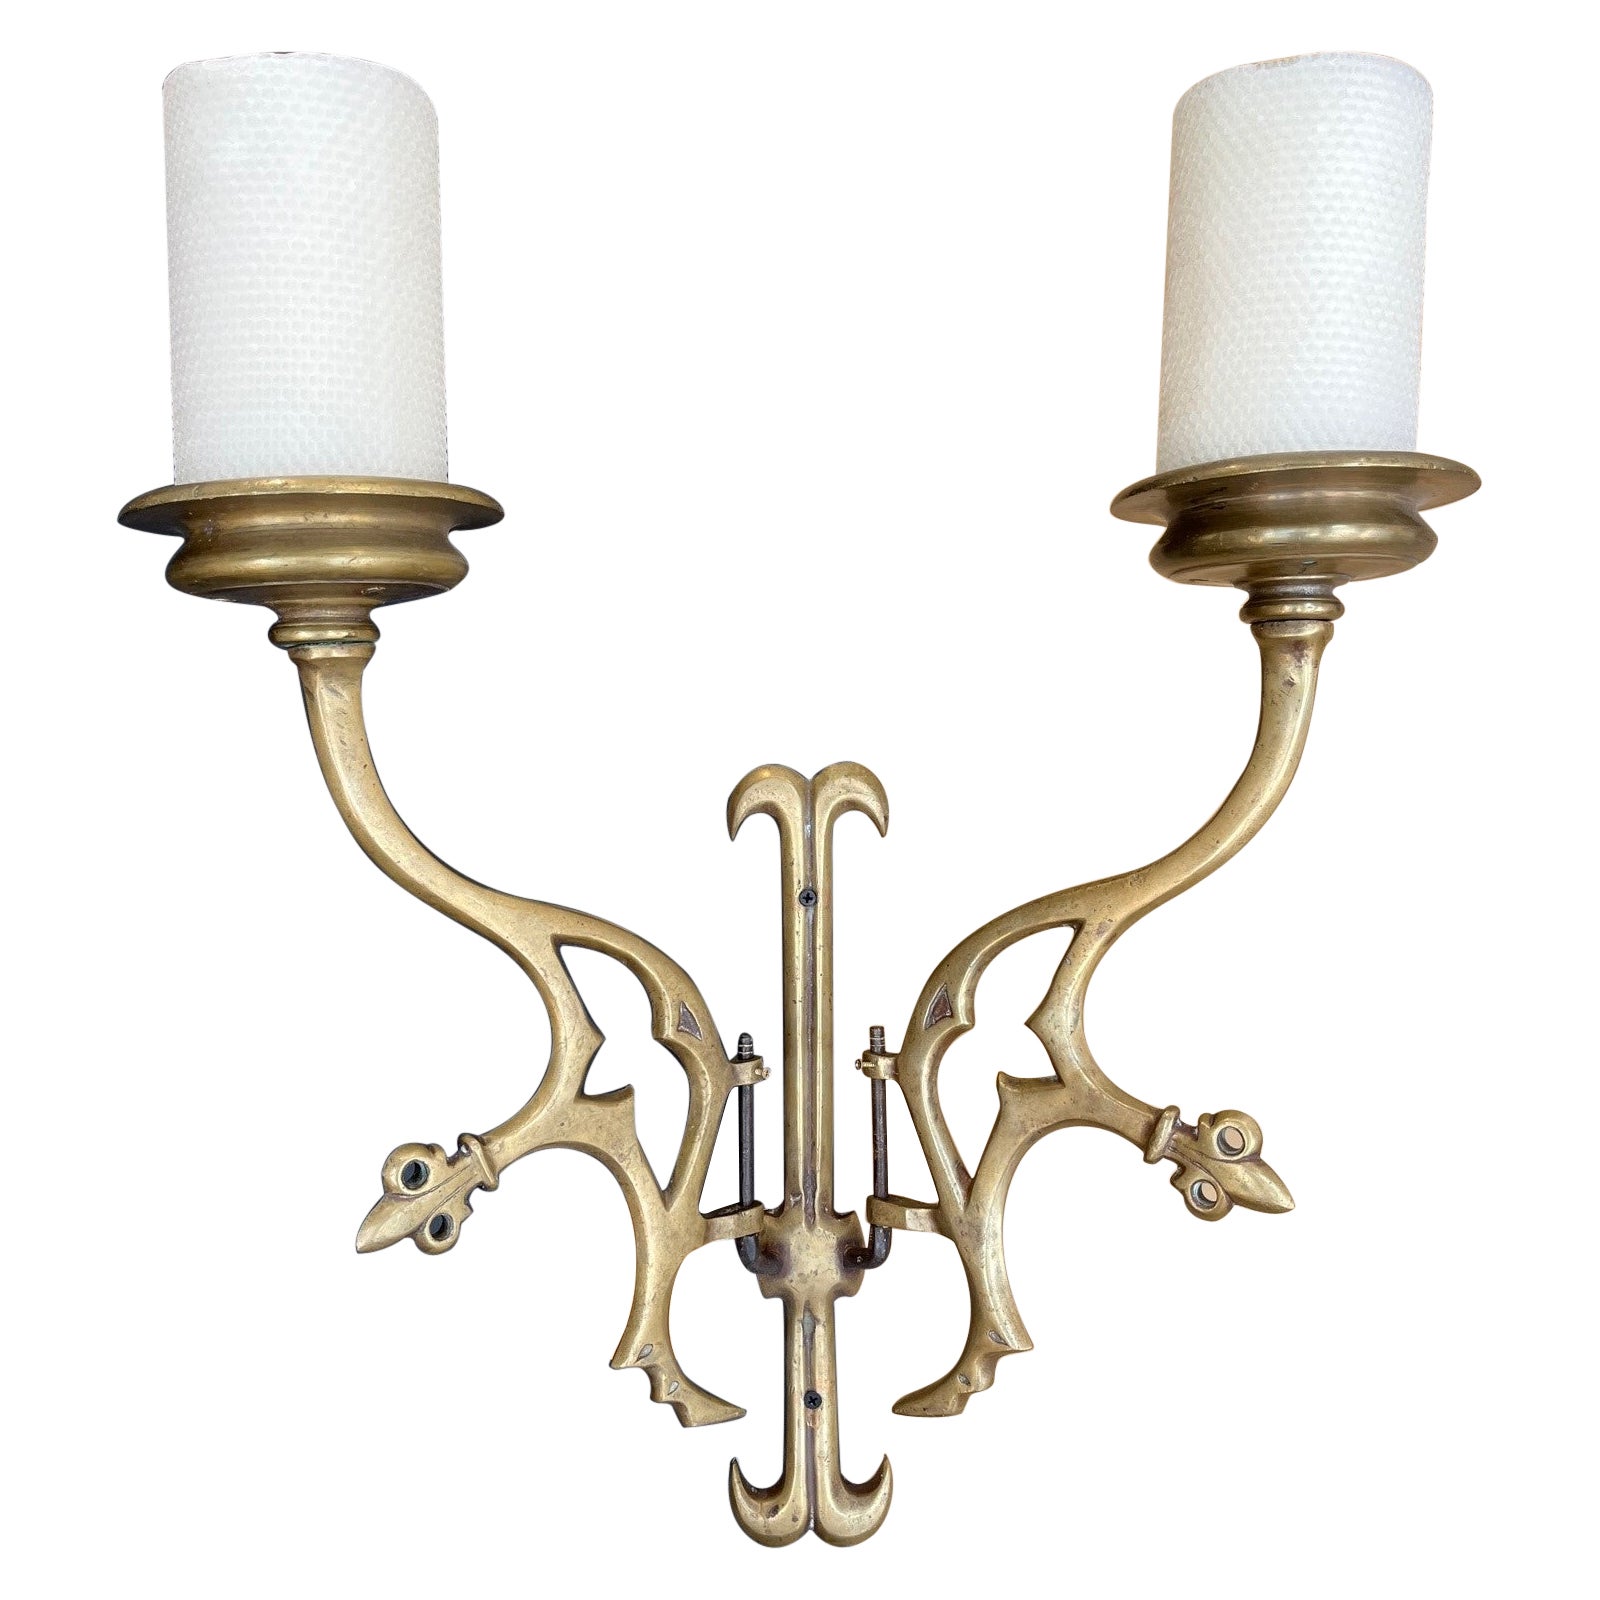 Pair Of Vintage Cast Brass Candleholders, Wall Sconces